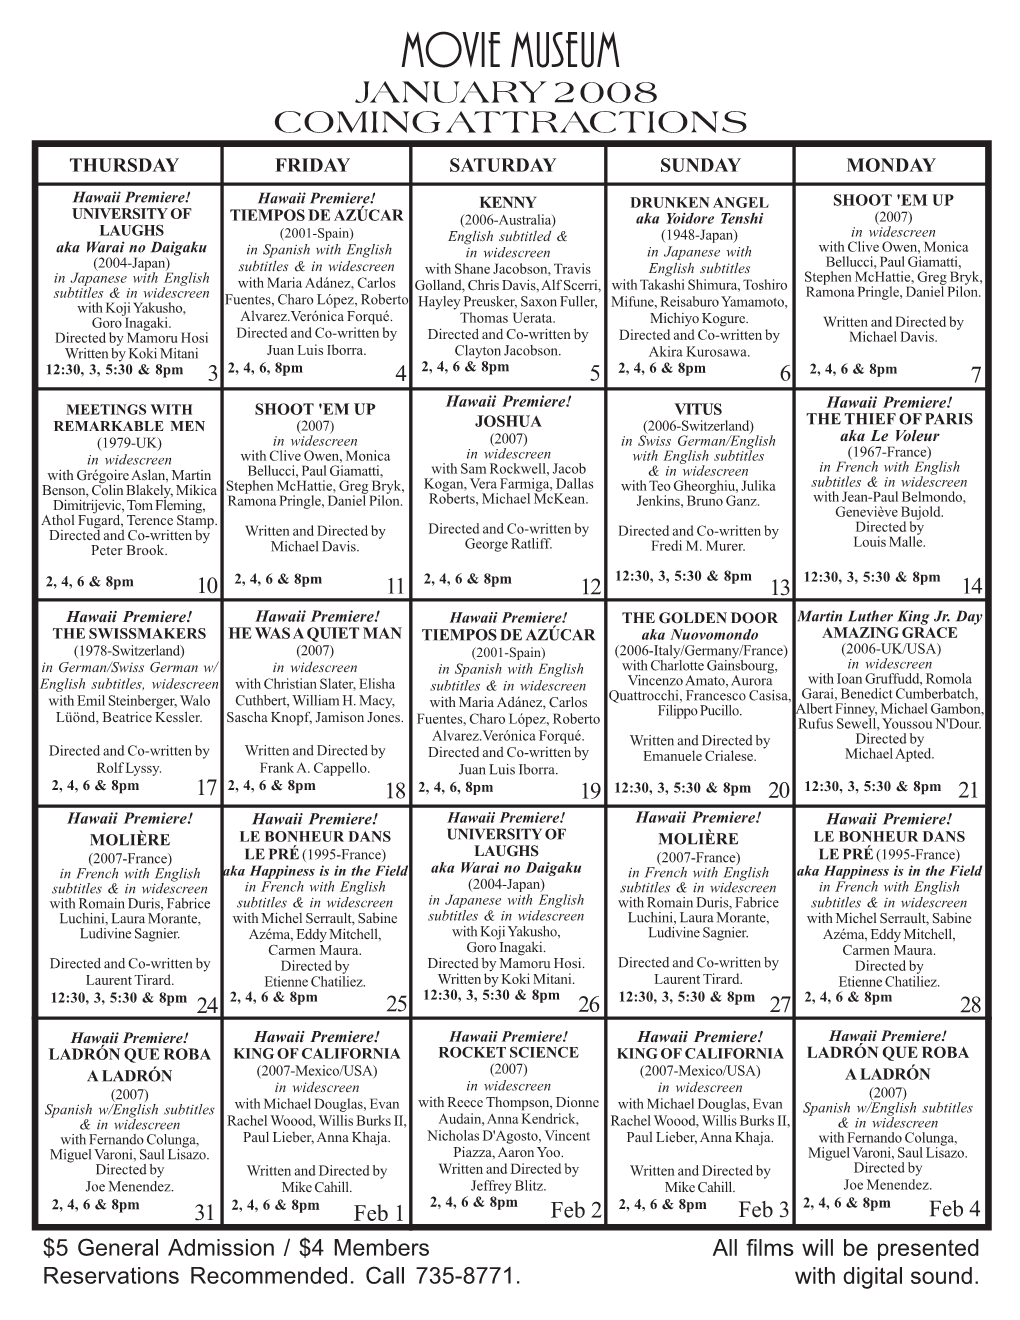 Download January 2008 Movie Schedule